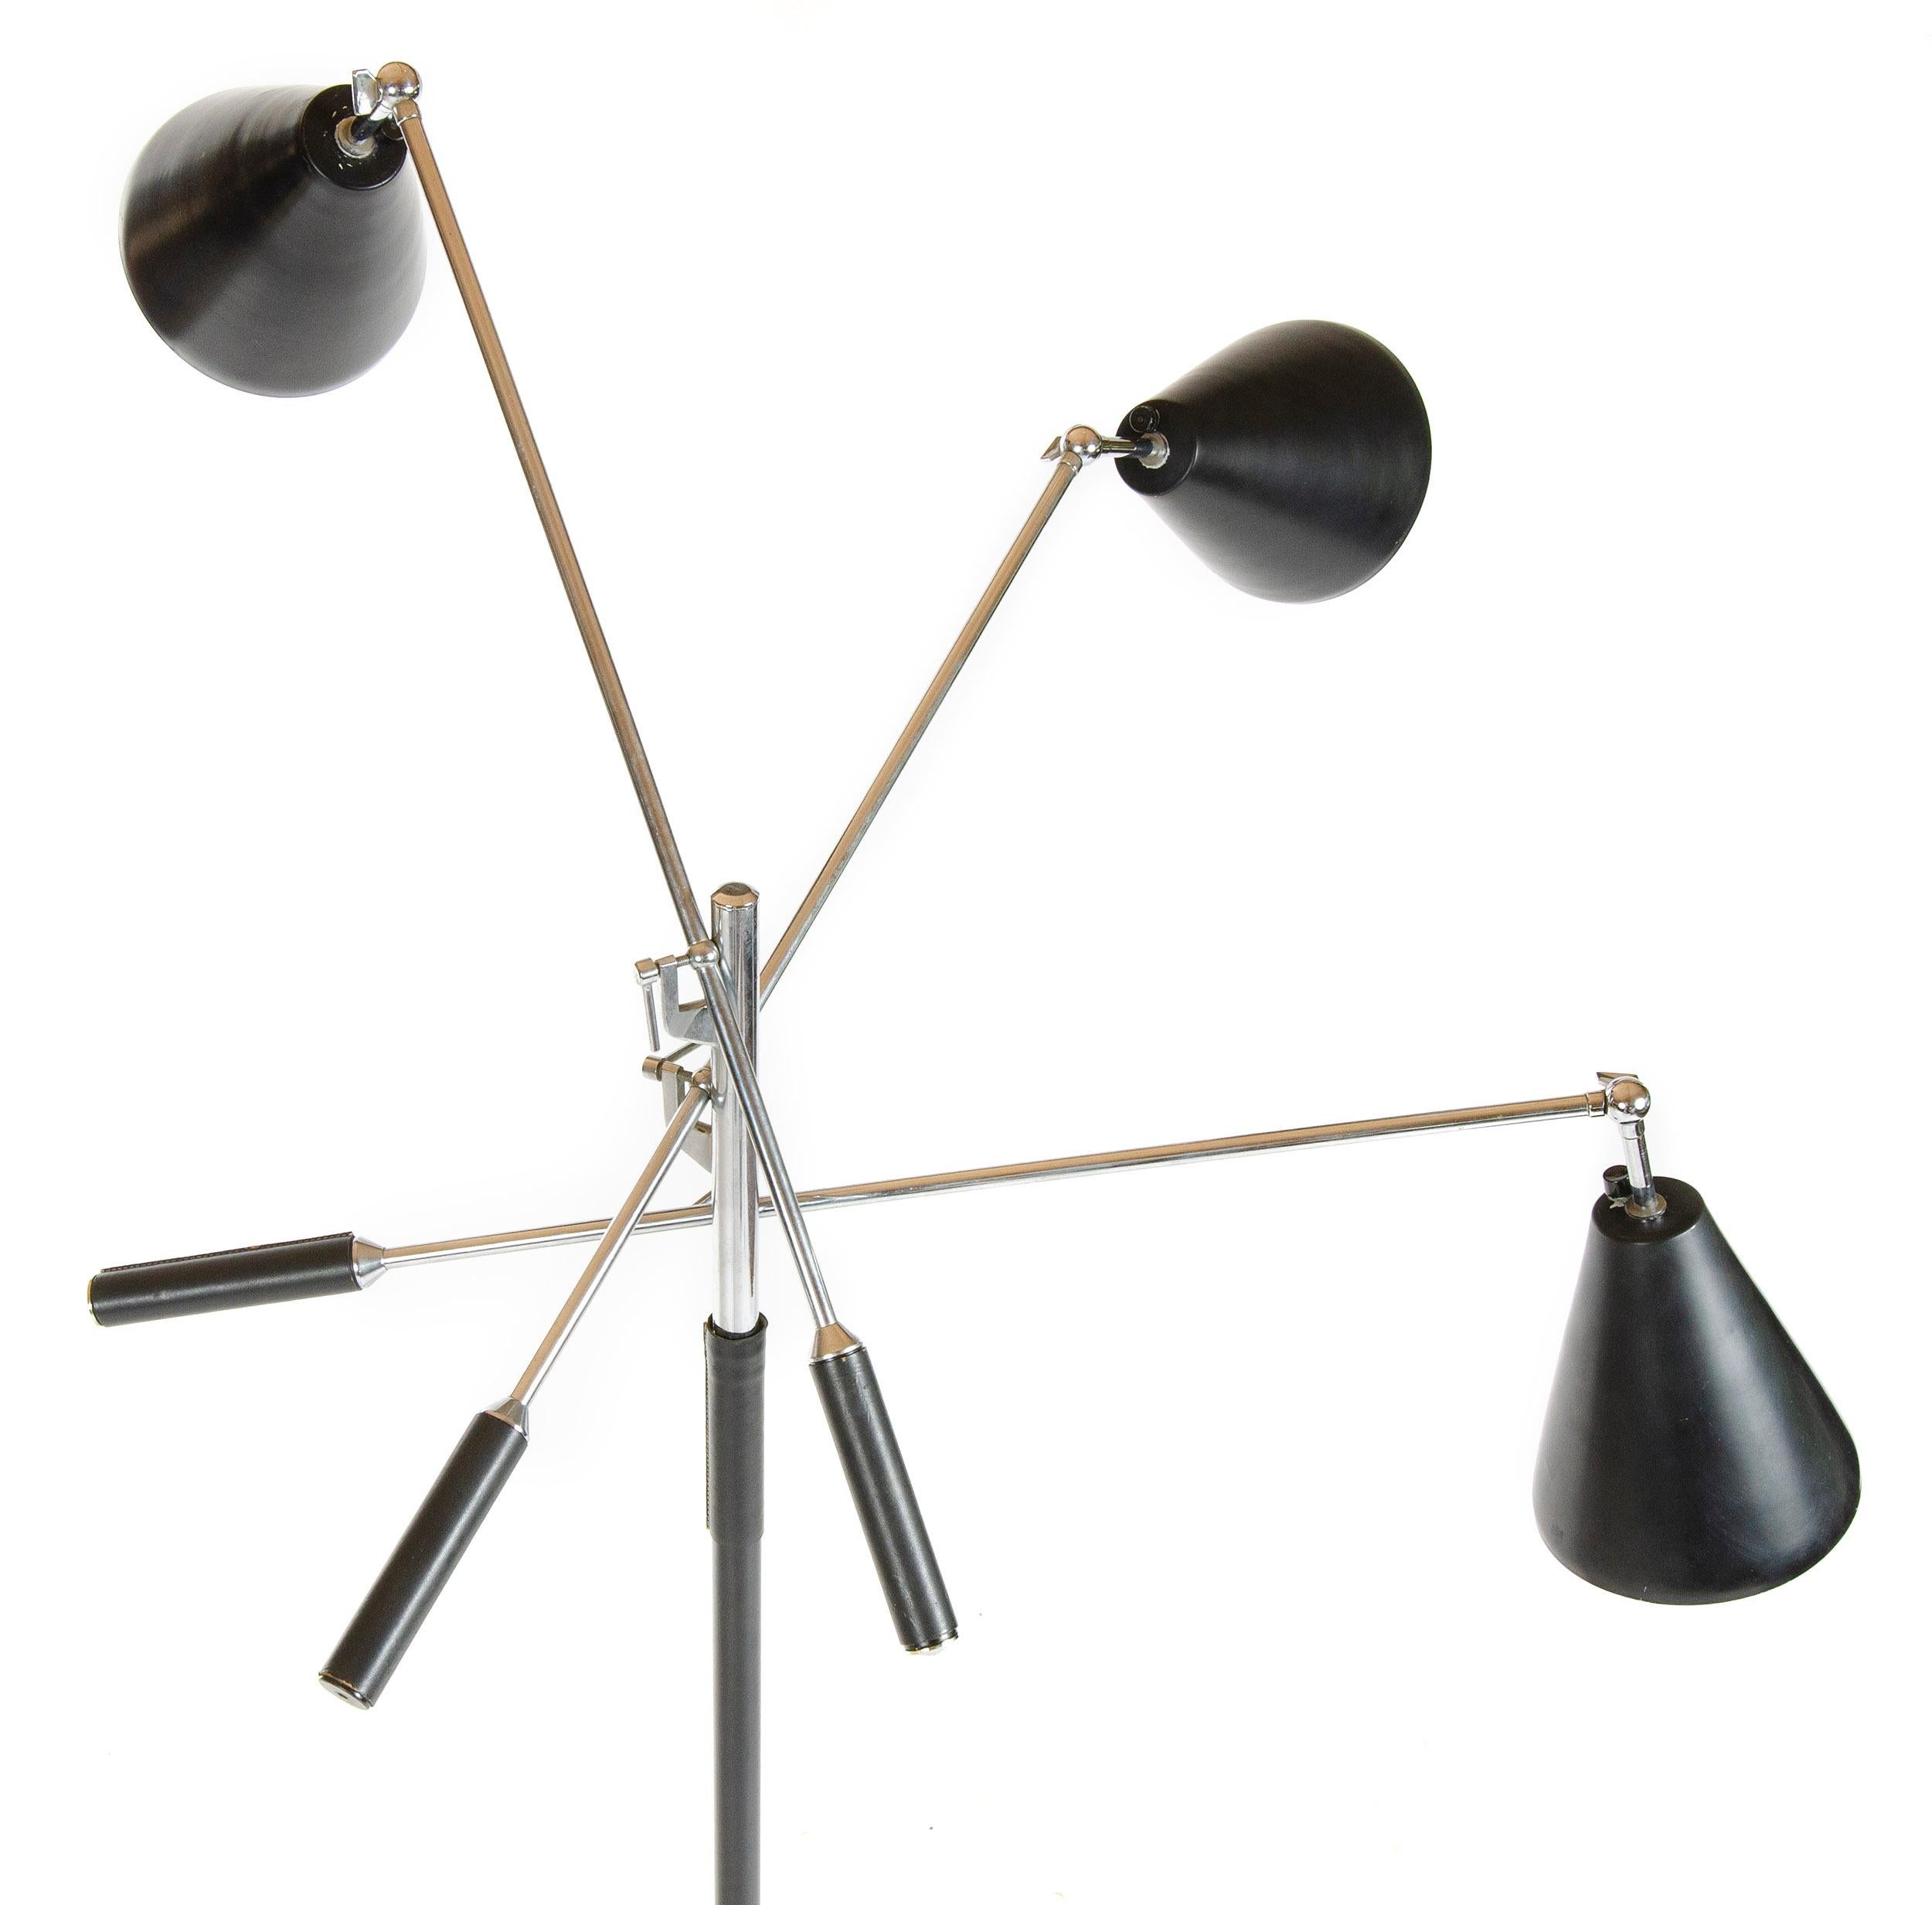 A 'Triennale' floor lamp from the period distributed by Koch & Lowy (NYC) with three chromed fully articulating arms and hand stitched black leather grips supporting (3) conical metal shades. A black and white marble base supports a black